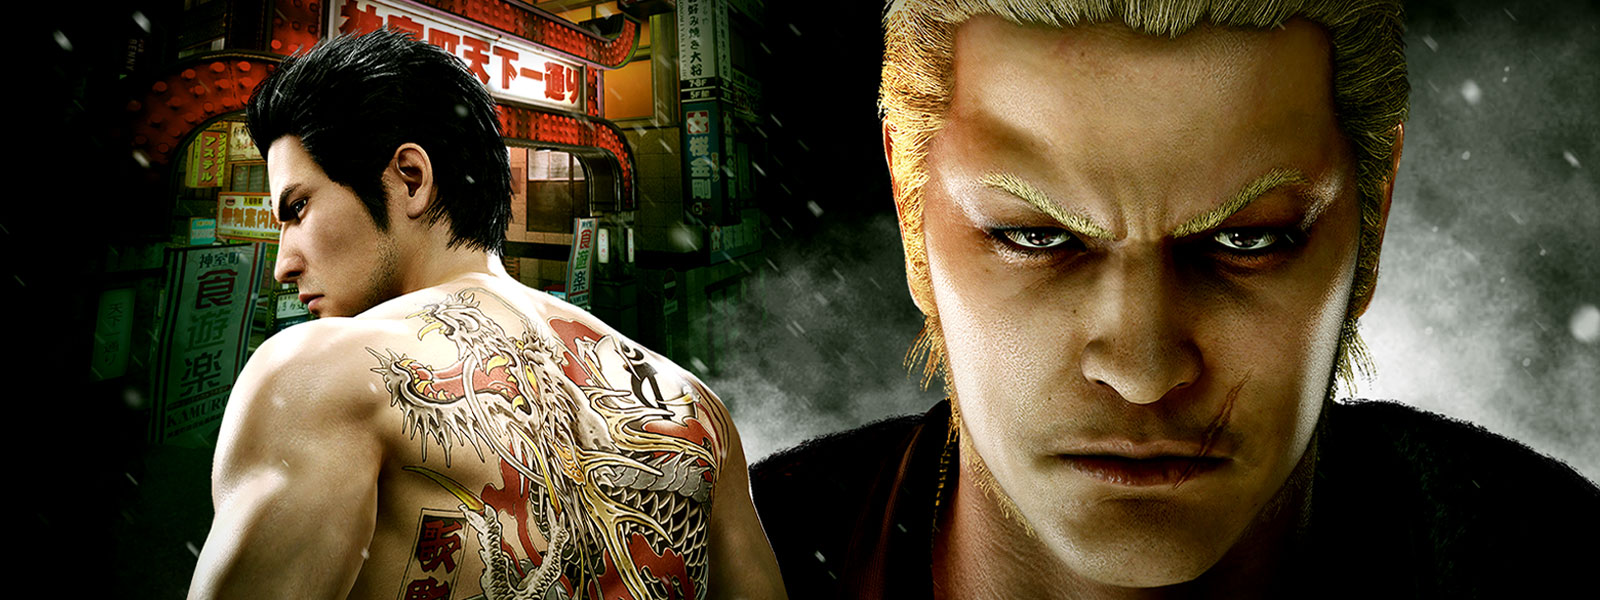 Two Yakuza characters are featured in a gritty nighttime city setting.